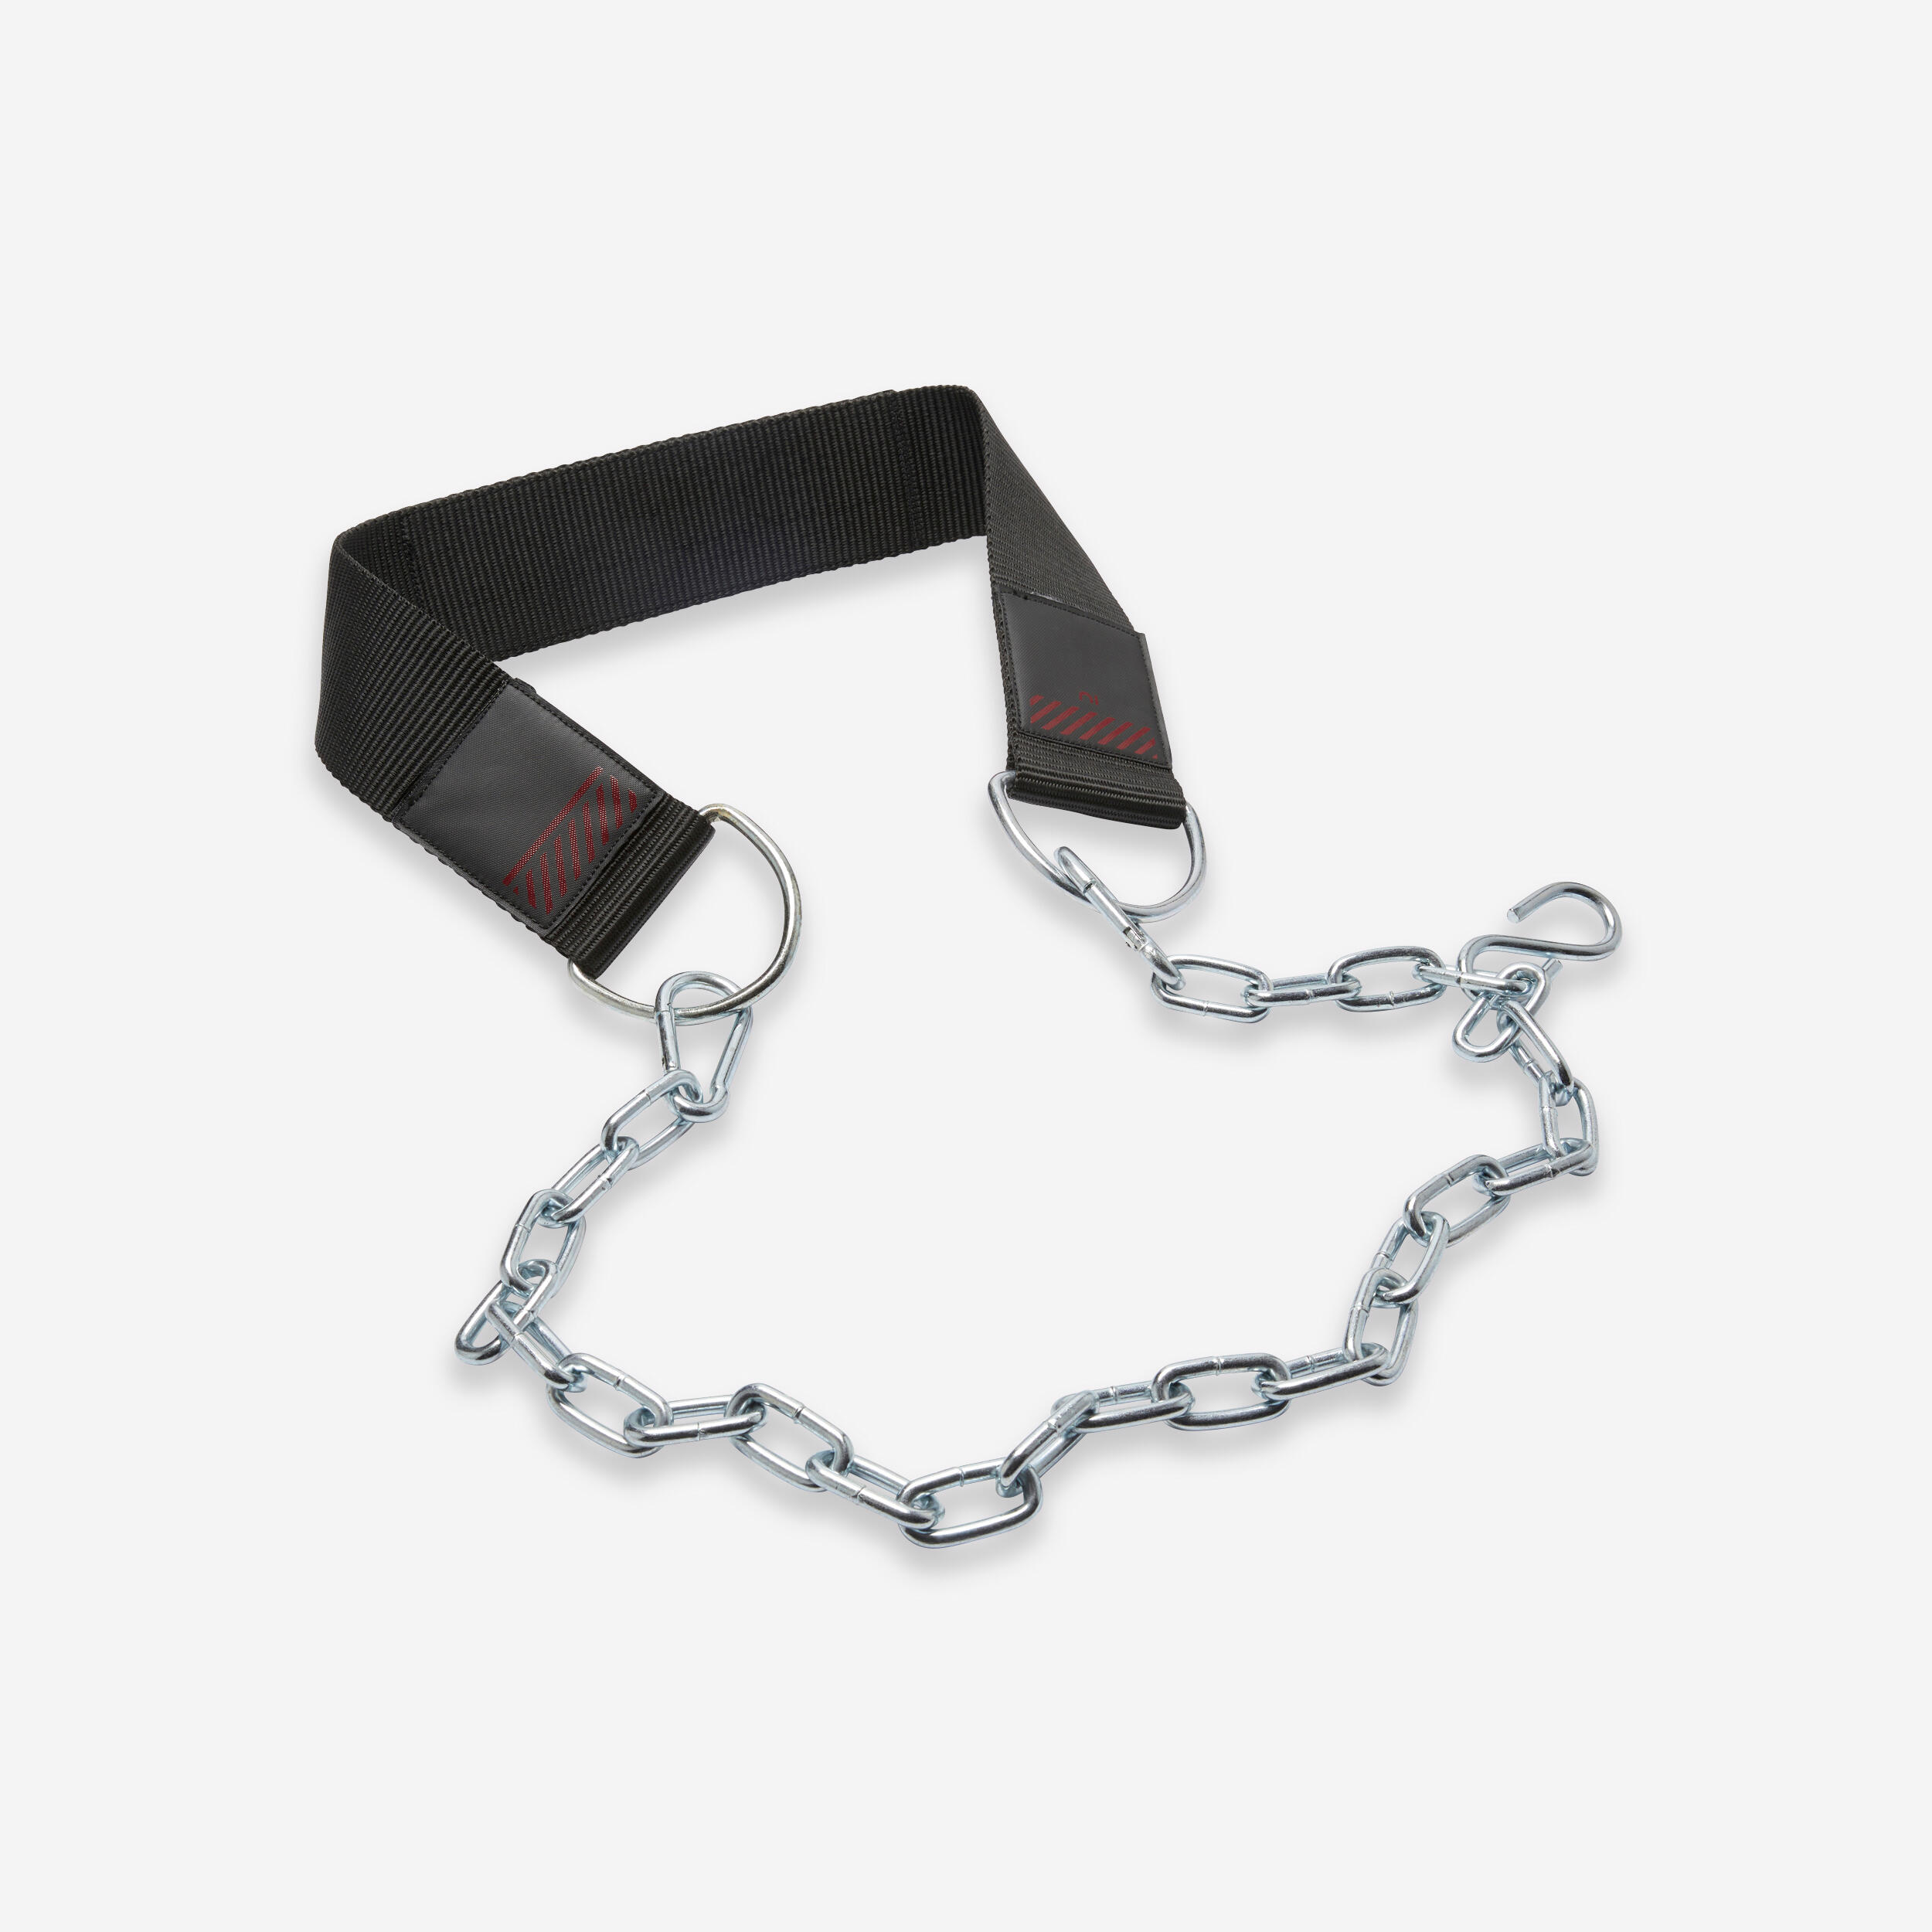 Weight Training Weighted Chain Belt for Dips and Pull-ups - 120 kg 1/5